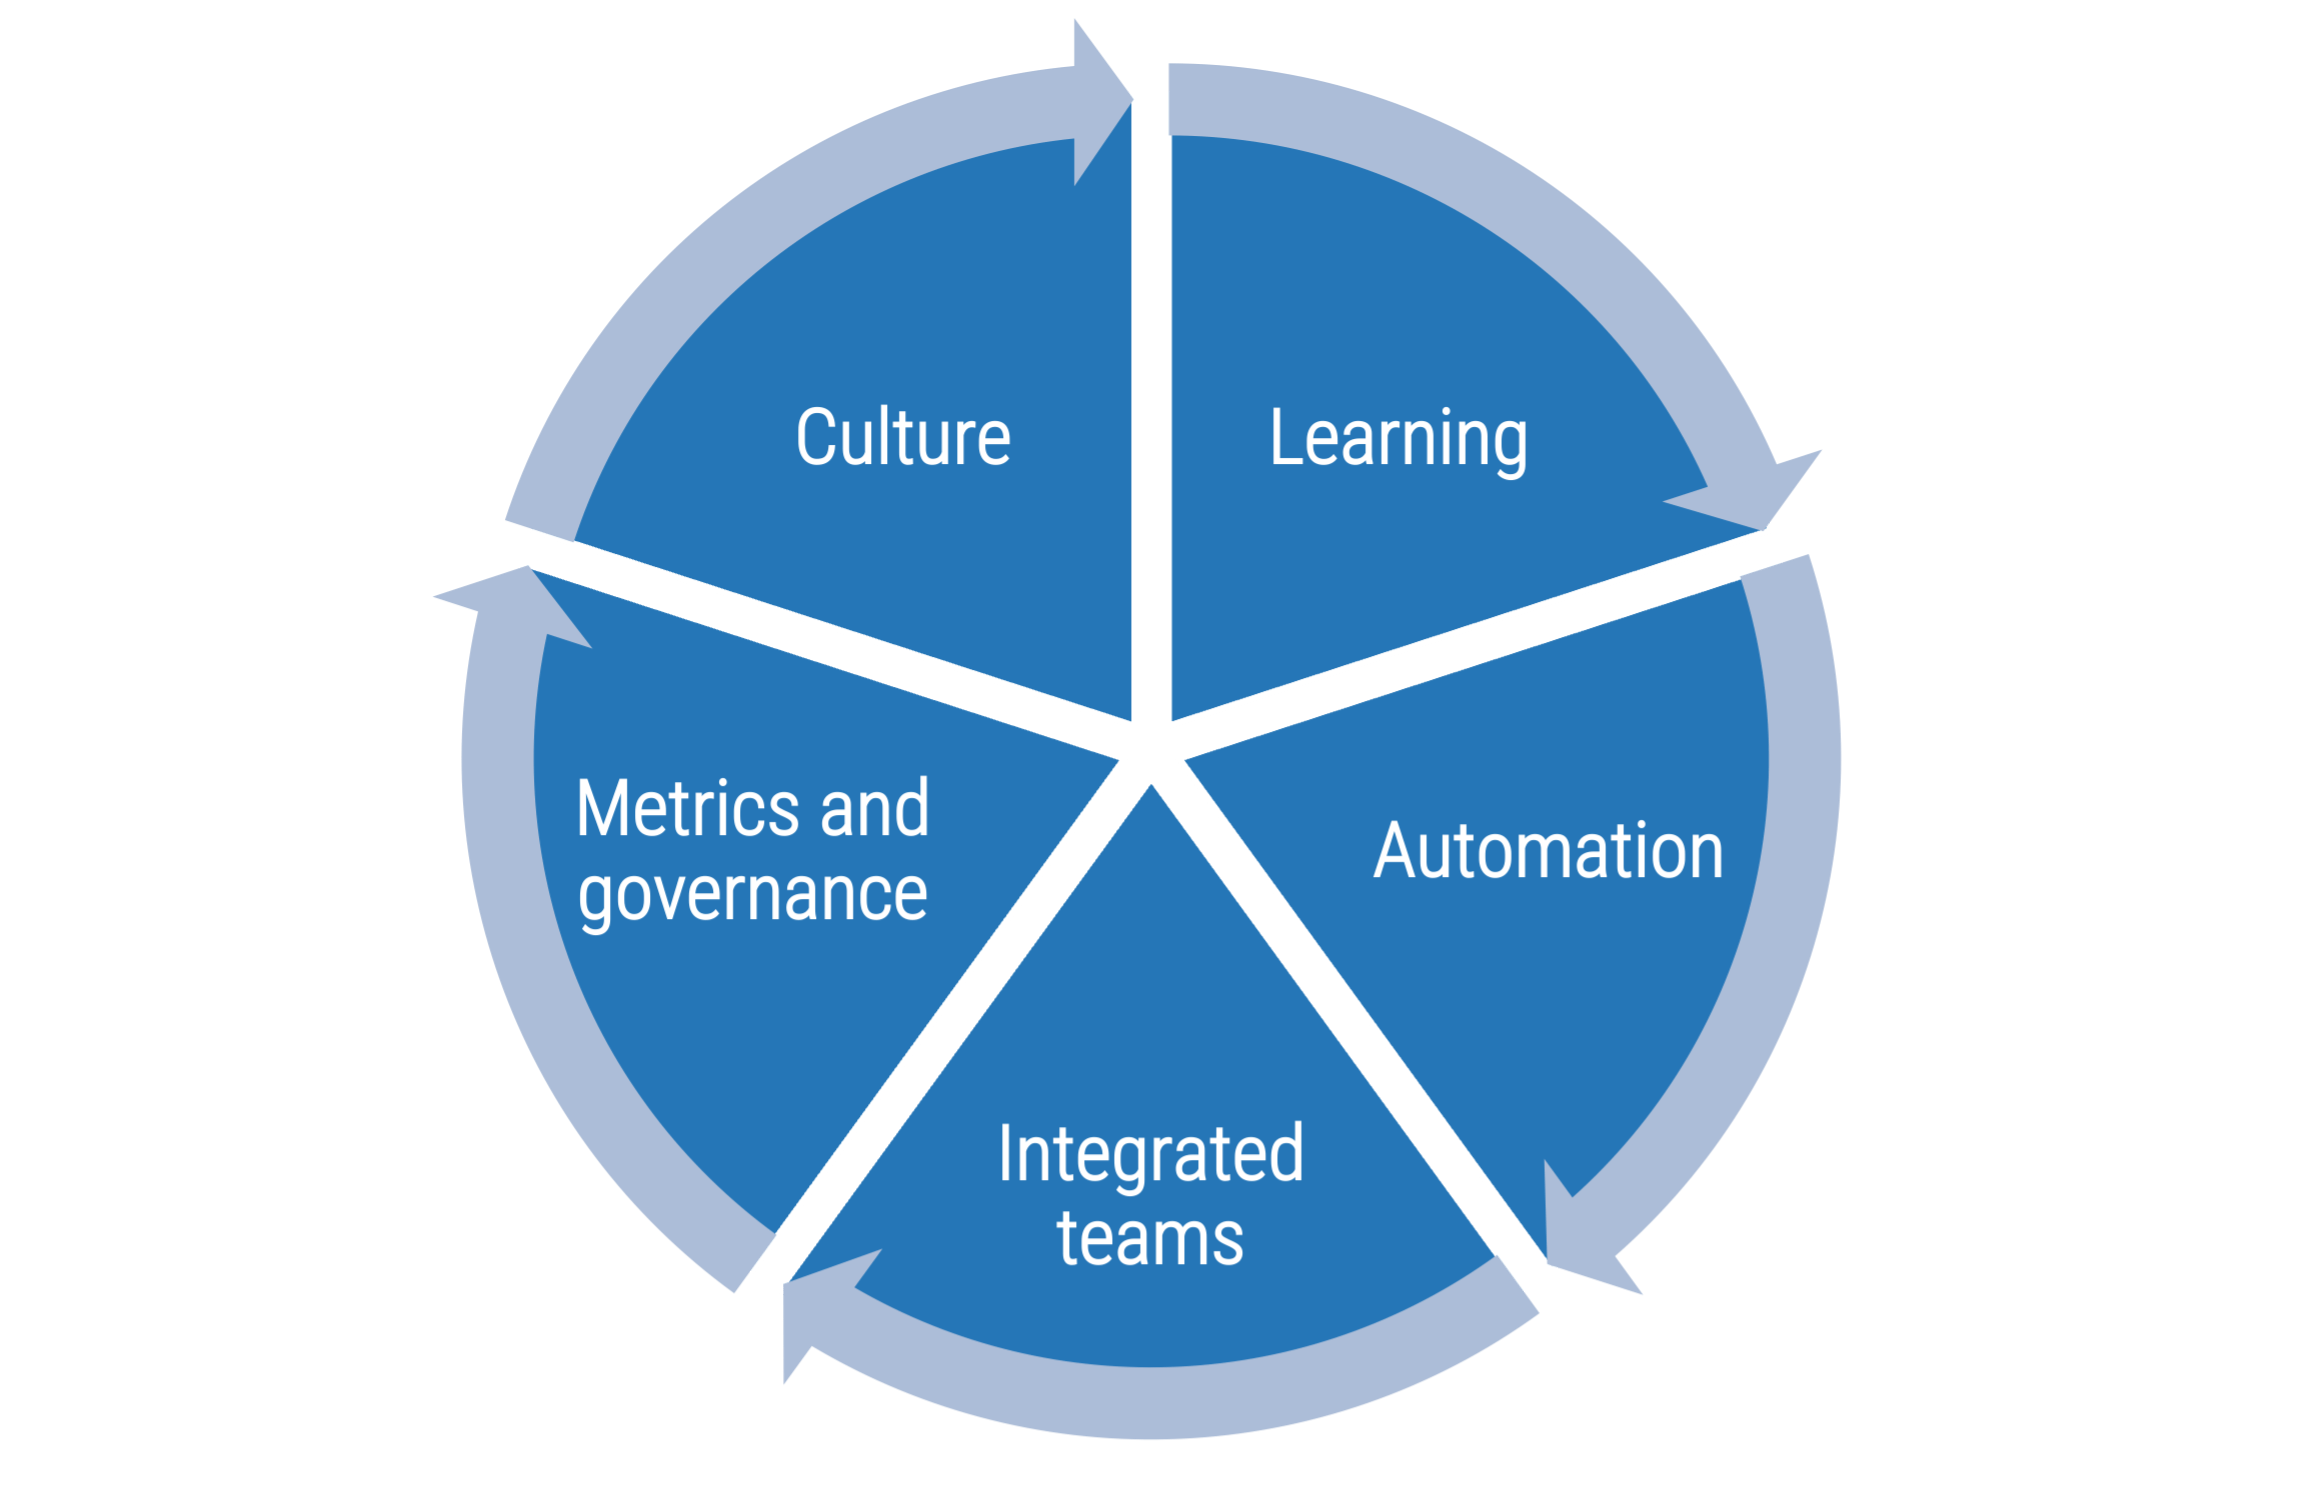 Culture, Learning, Automation, Integrated teams, Metrics and governance.